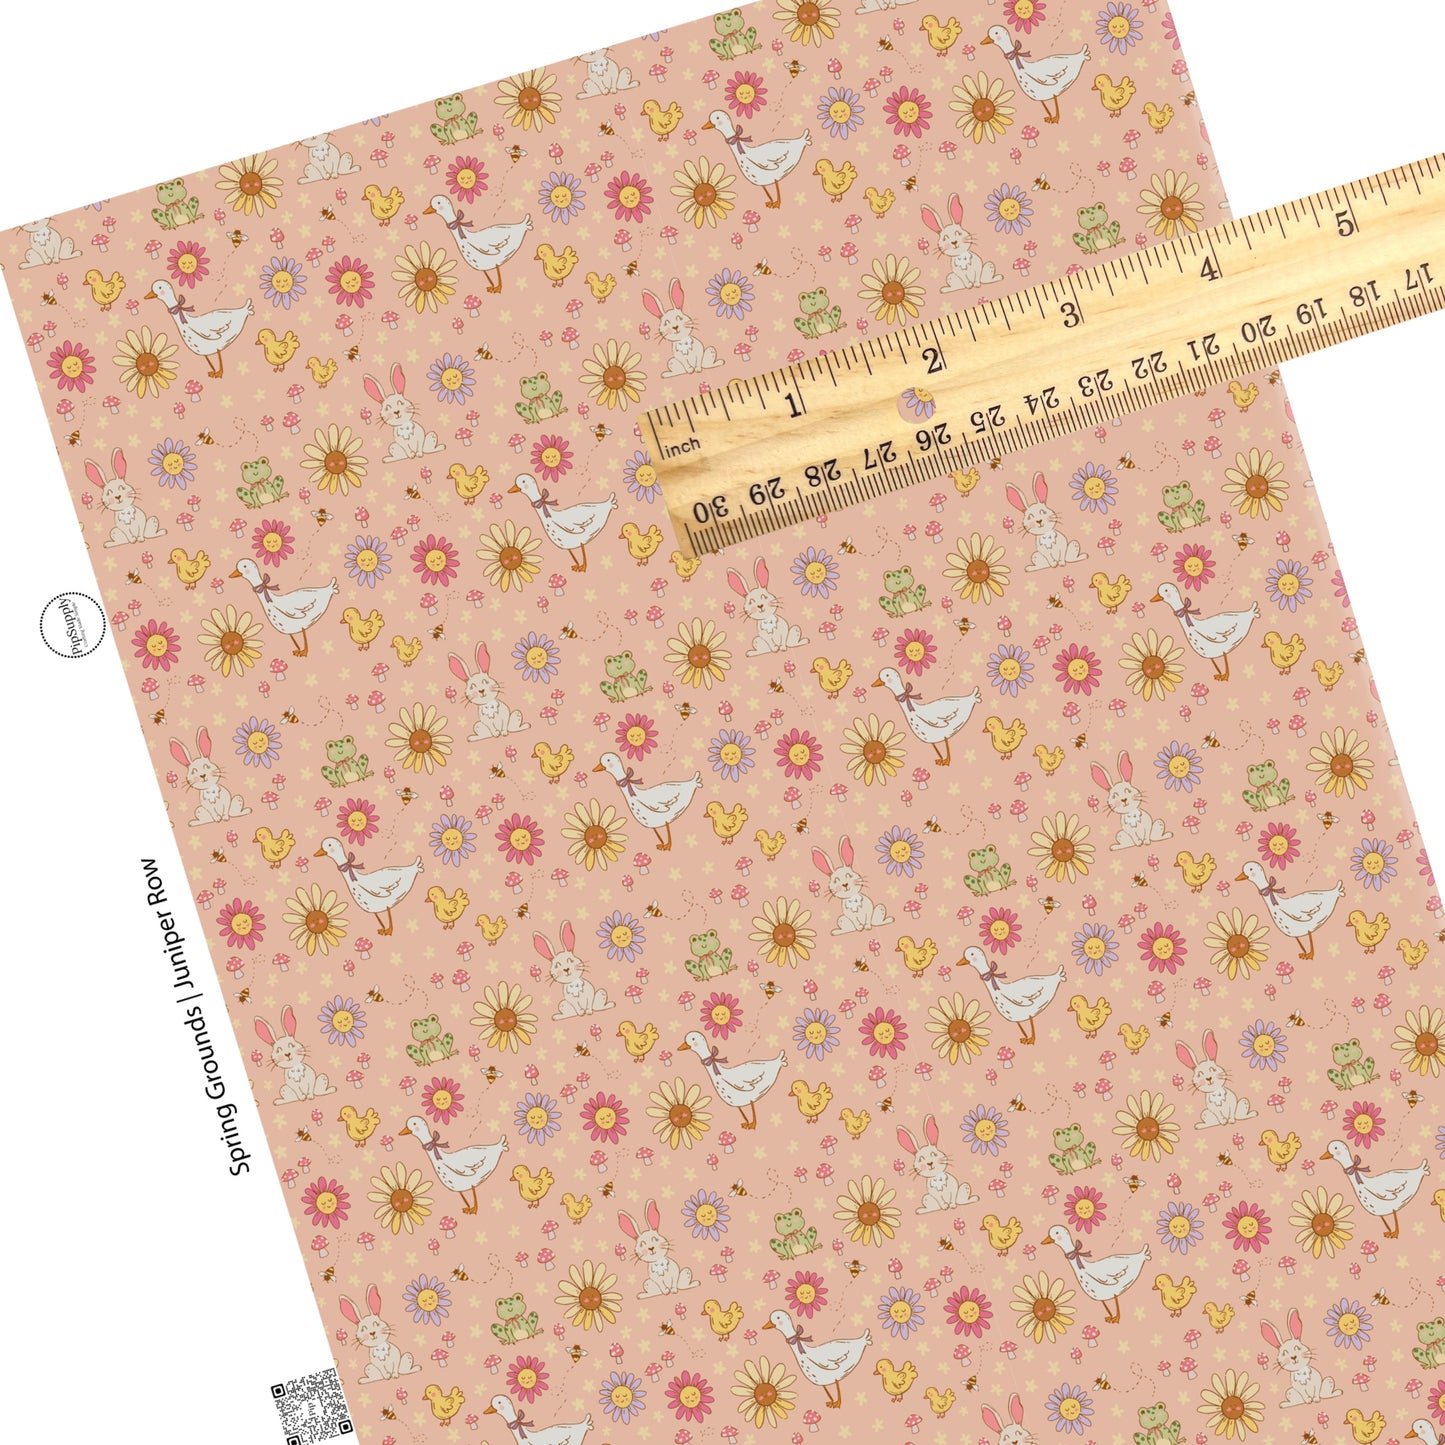 These spring flowers and animals faux leather sheets contain the following design elements: smiley flowers, ducks, geese, bumblebees, bunnies, and frogs. Our CPSIA compliant faux leather sheets or rolls can be used for all types of crafting projects. 